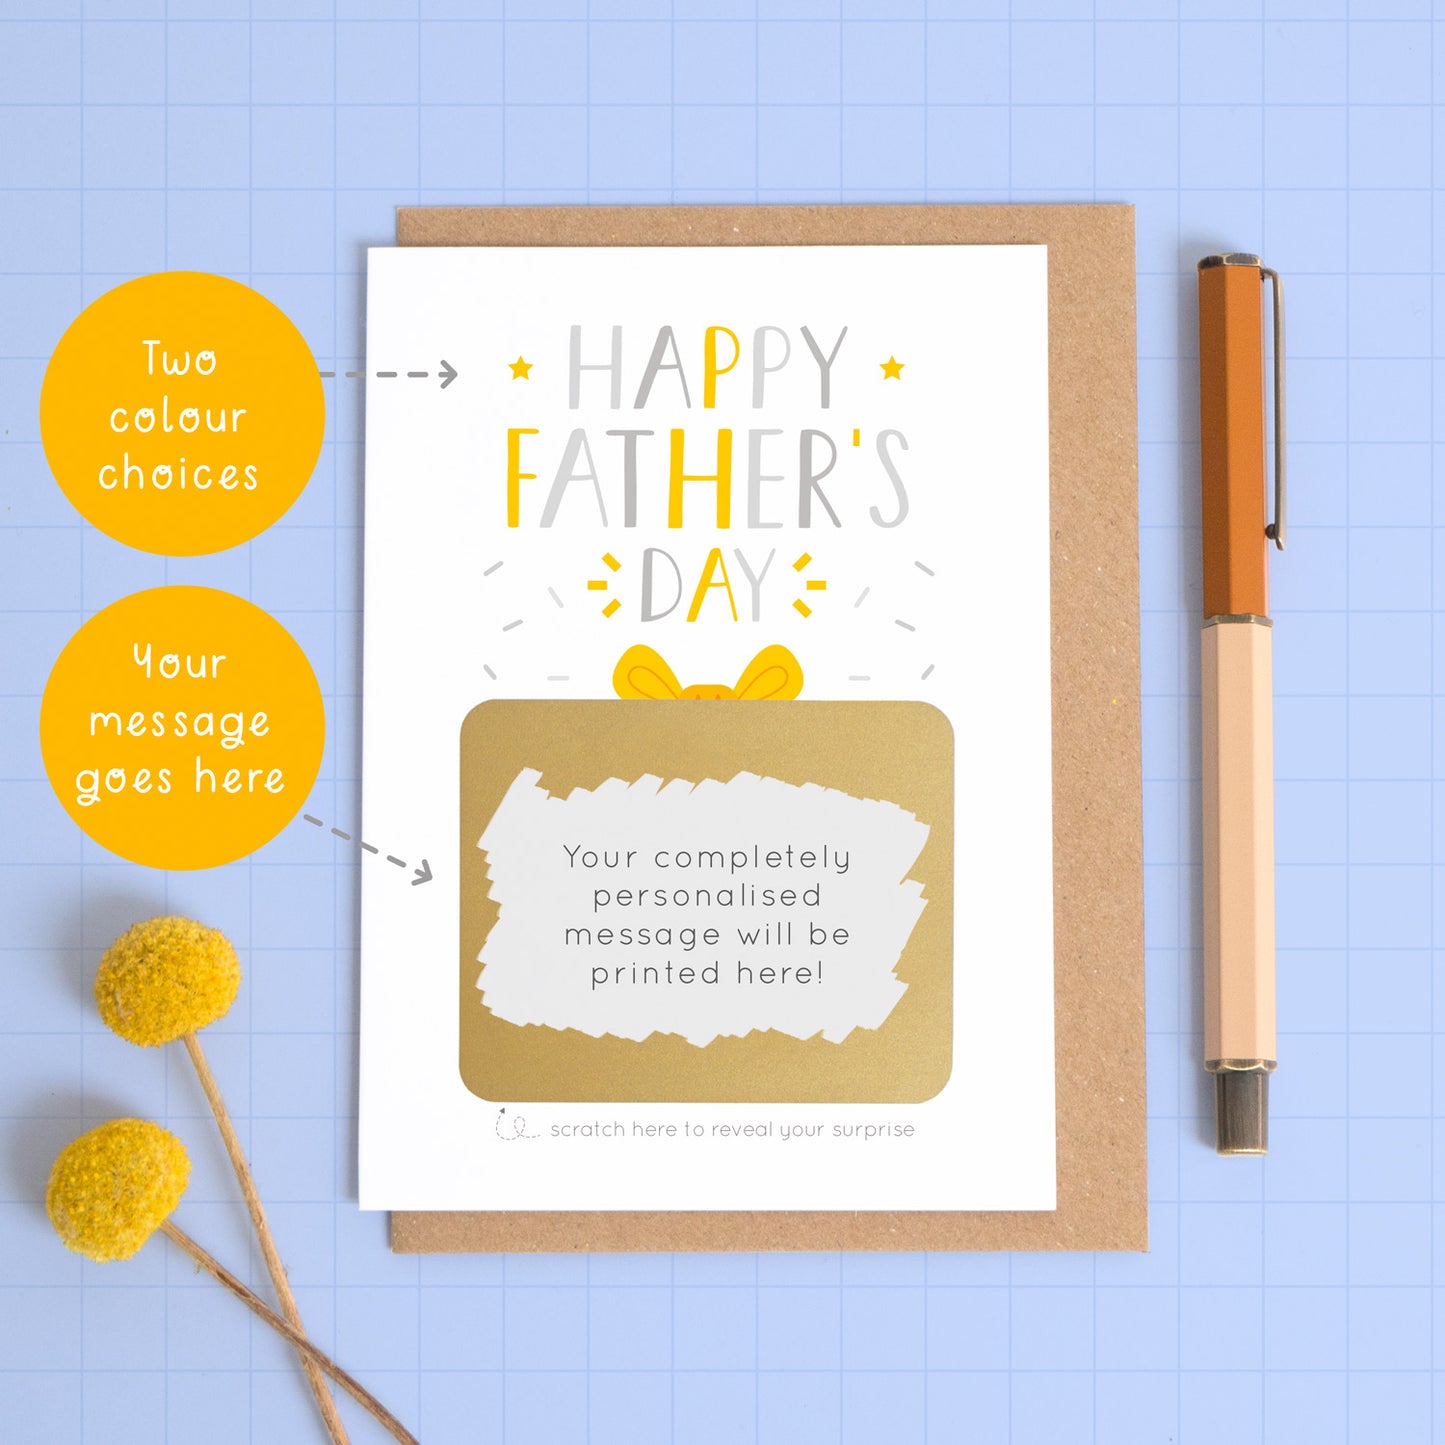 A personalised Father’s day scratch card photographed on a blue background with a pop of yellow flowers and a pen for scale. This image shows the grey and yellow version of the card with your custom options. These are the two colour choices and the personalised message.